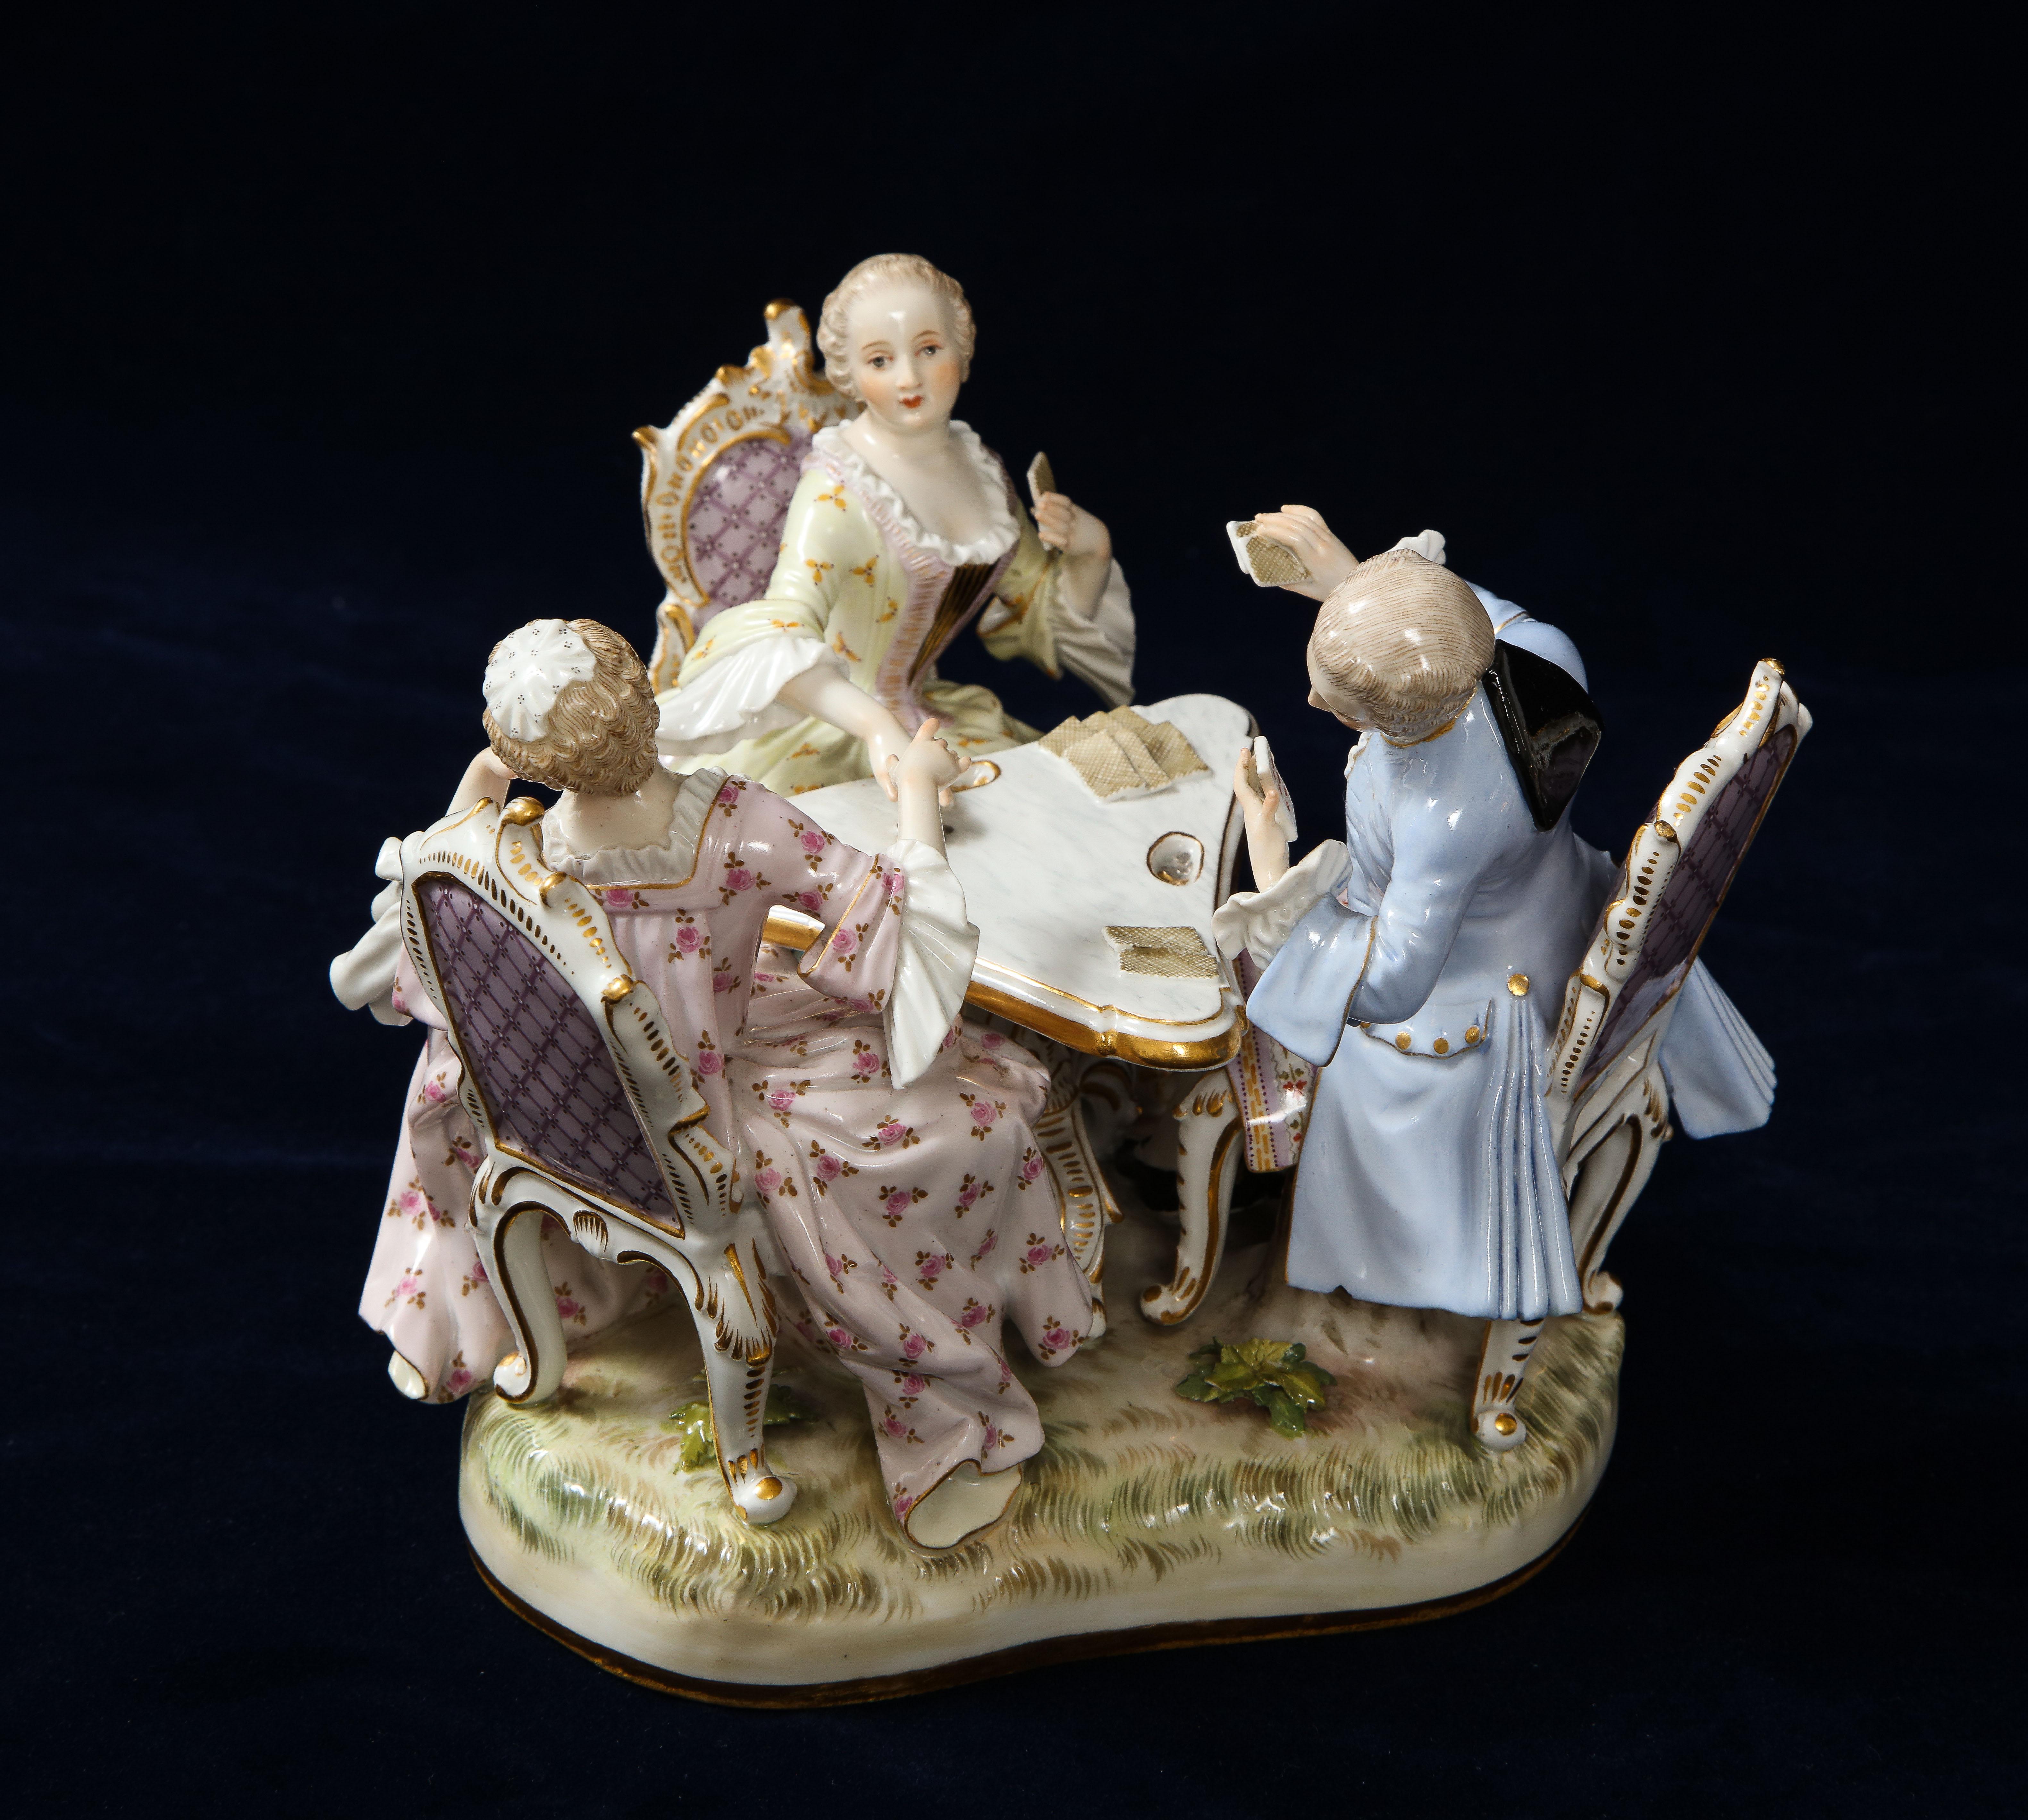 A fabulous and beautiful condition 19th century Louis XVI style Meissen porcelain group of three card players gallant figures. This grouping by Meissen is of the finest quality of hand painted work by the Meissen factory. Each figure is